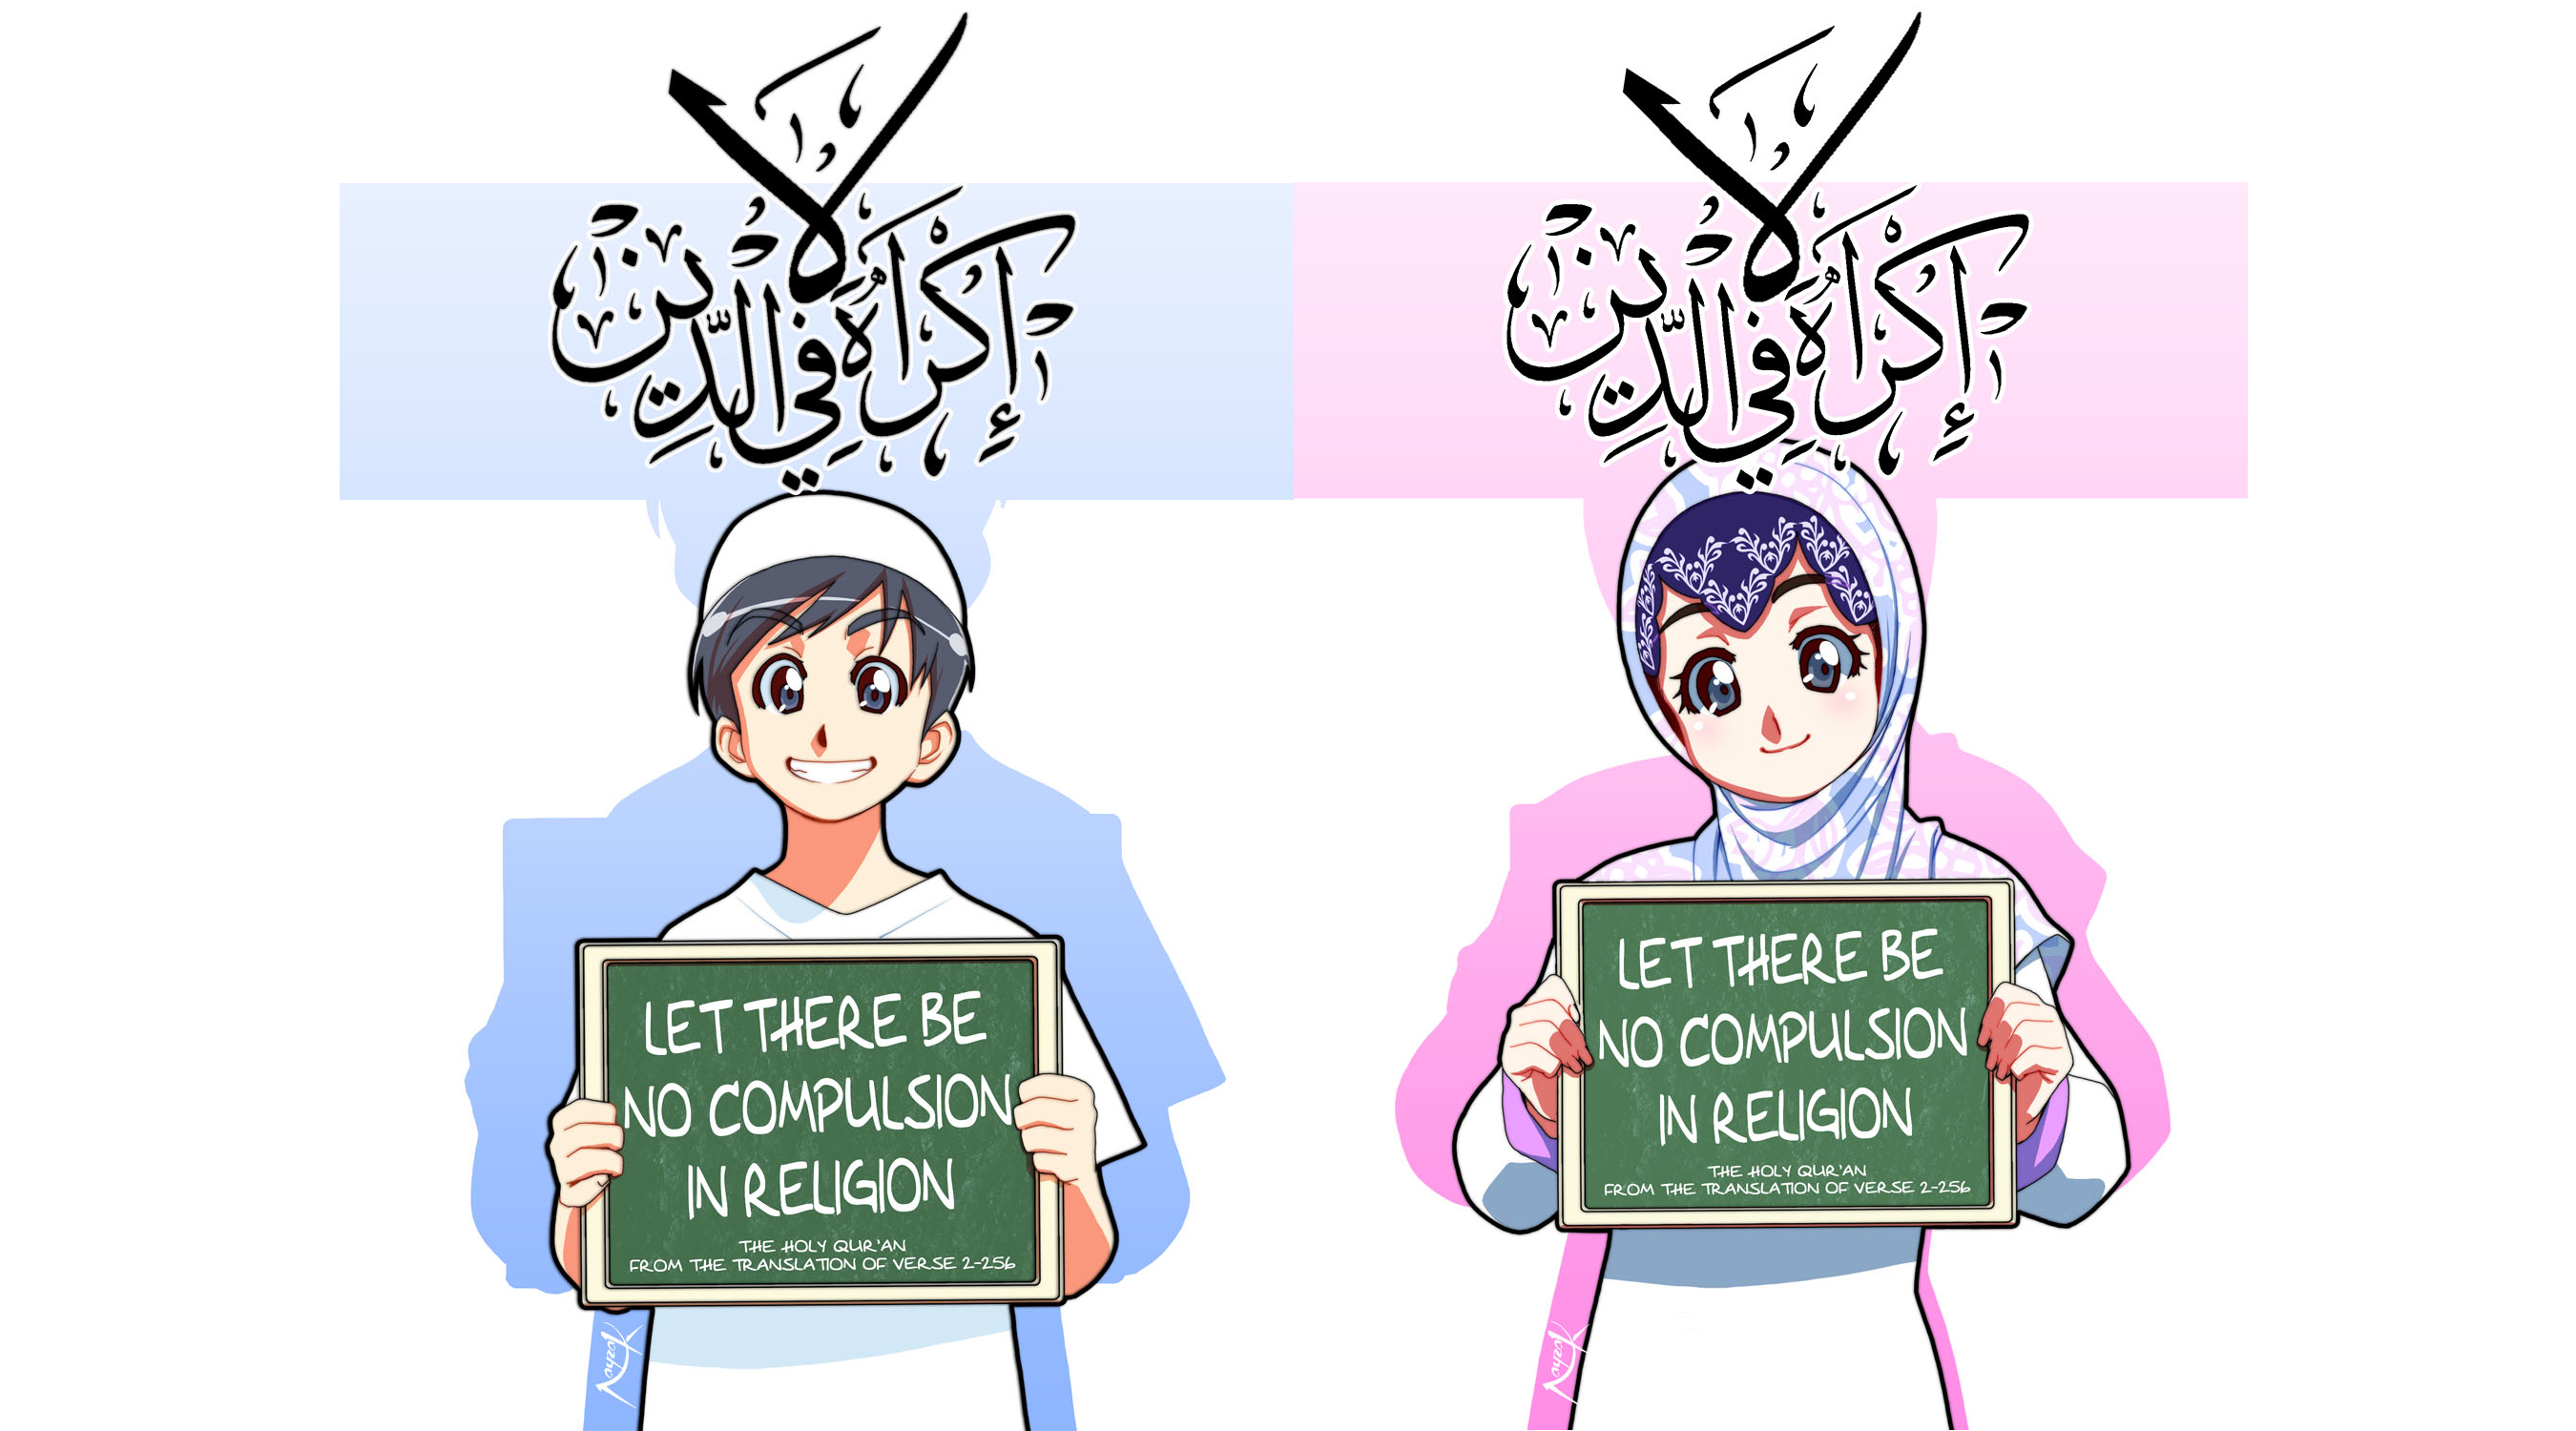 Let there be no compultion in the religion by Nayzak